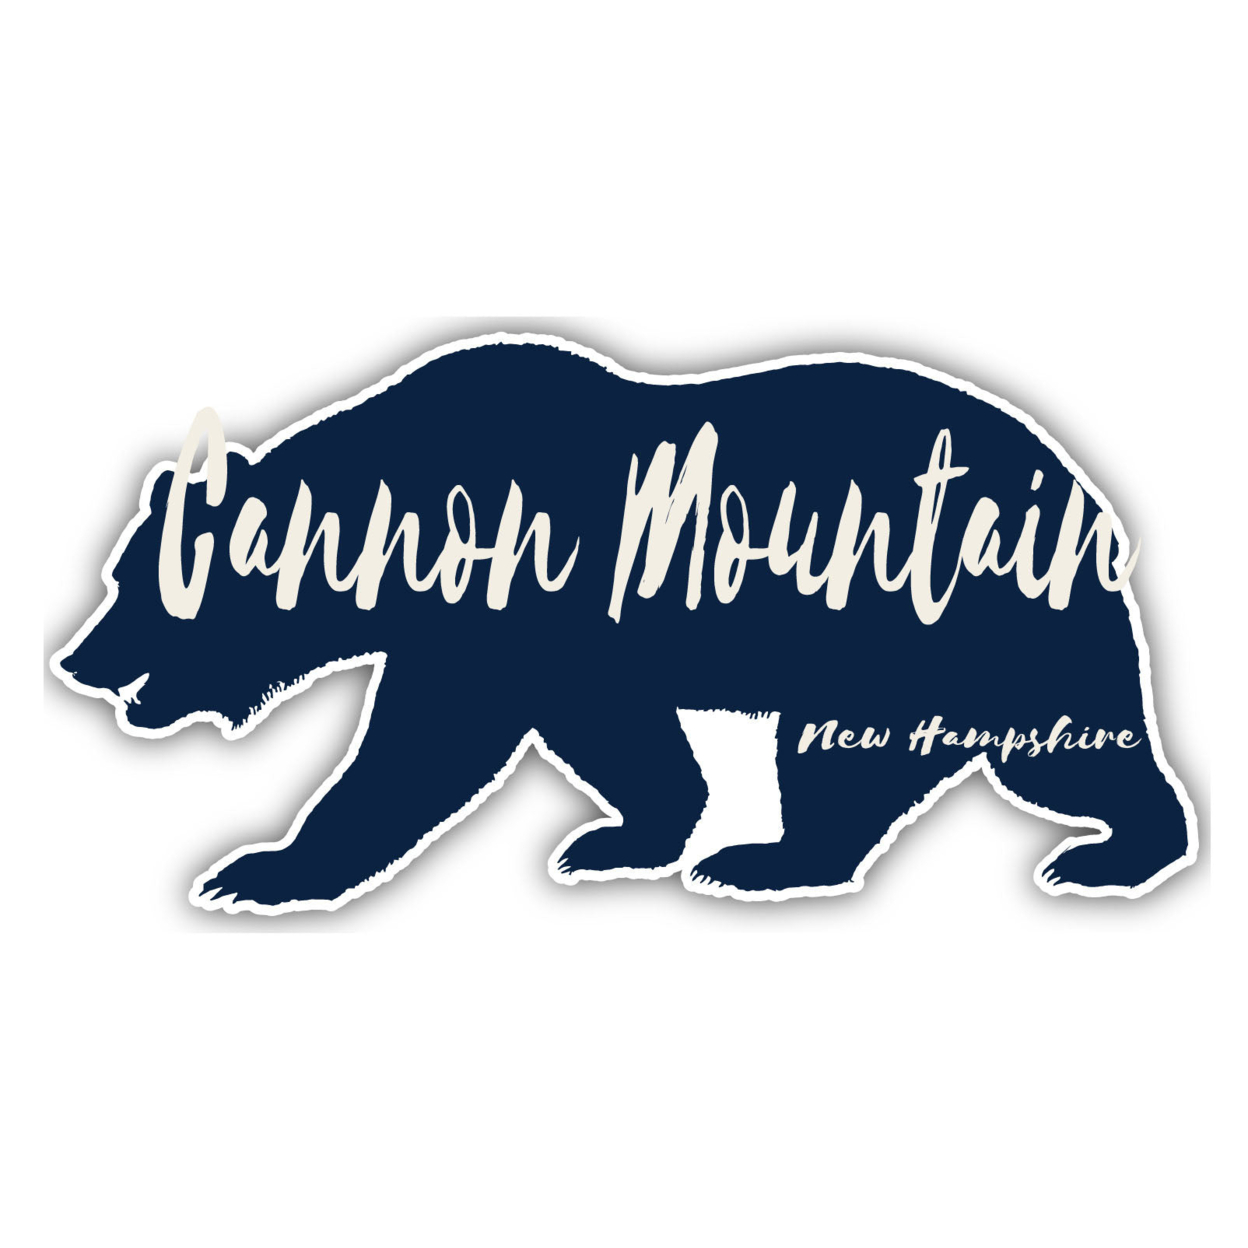 Cannon Mountain New Hampshire Souvenir Decorative Stickers (Choose Theme And Size) - 4-Pack, 4-Inch, Bear